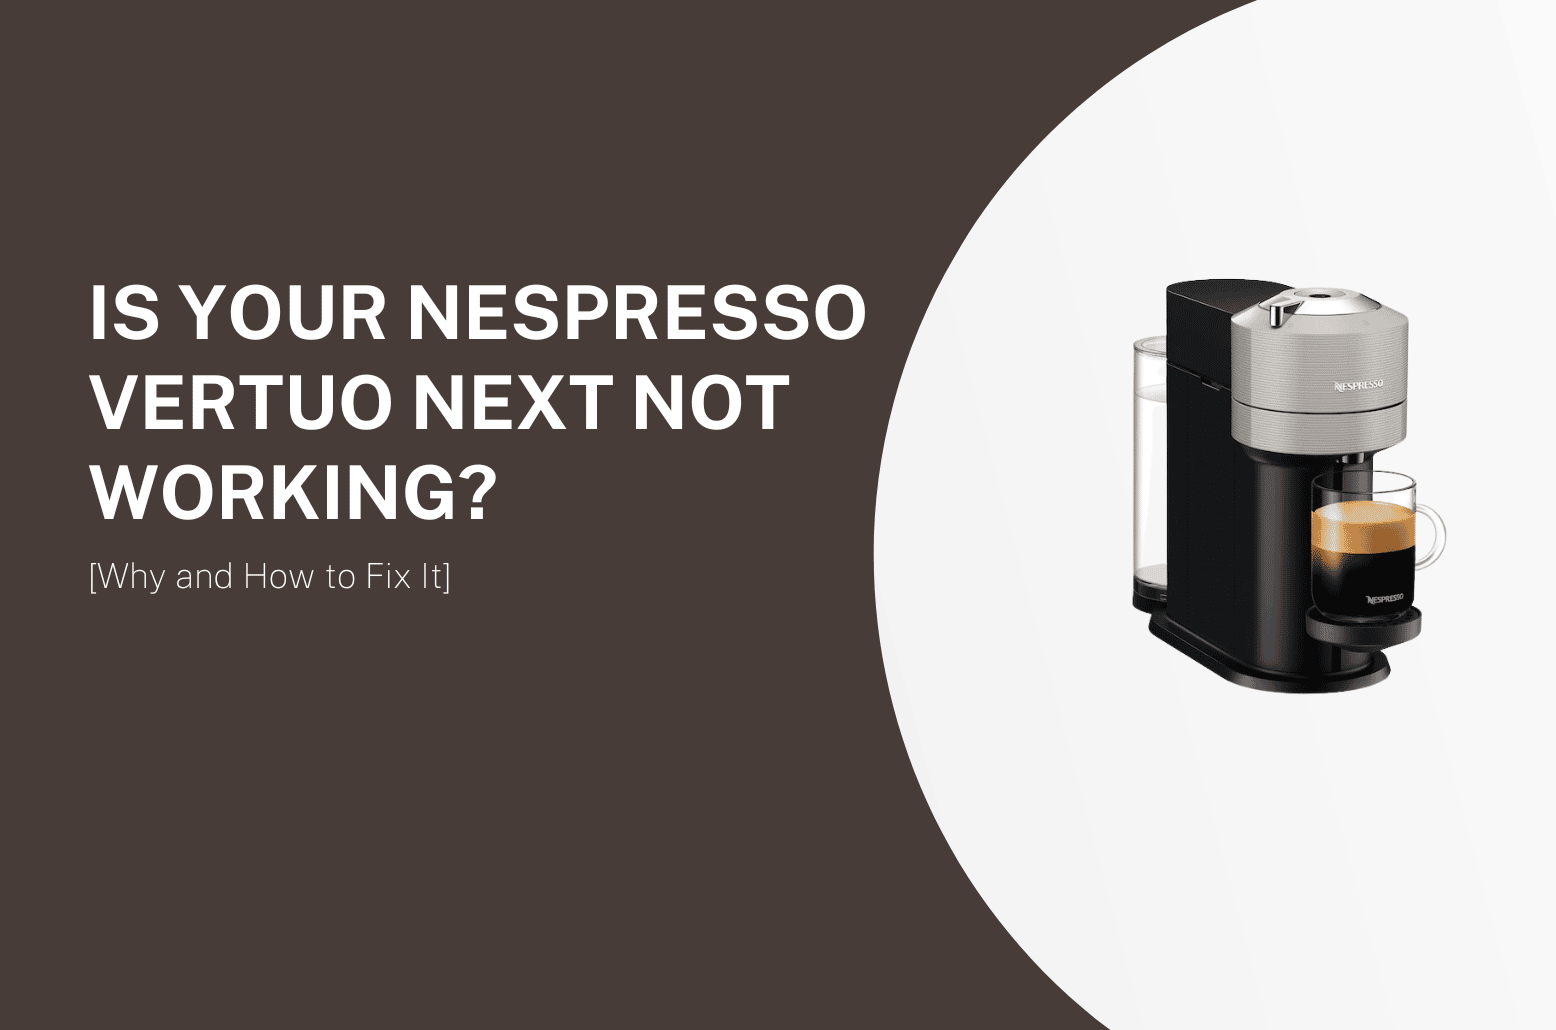 Is Your Nespresso Vertuo Next Not Working? [And How to Fix it]